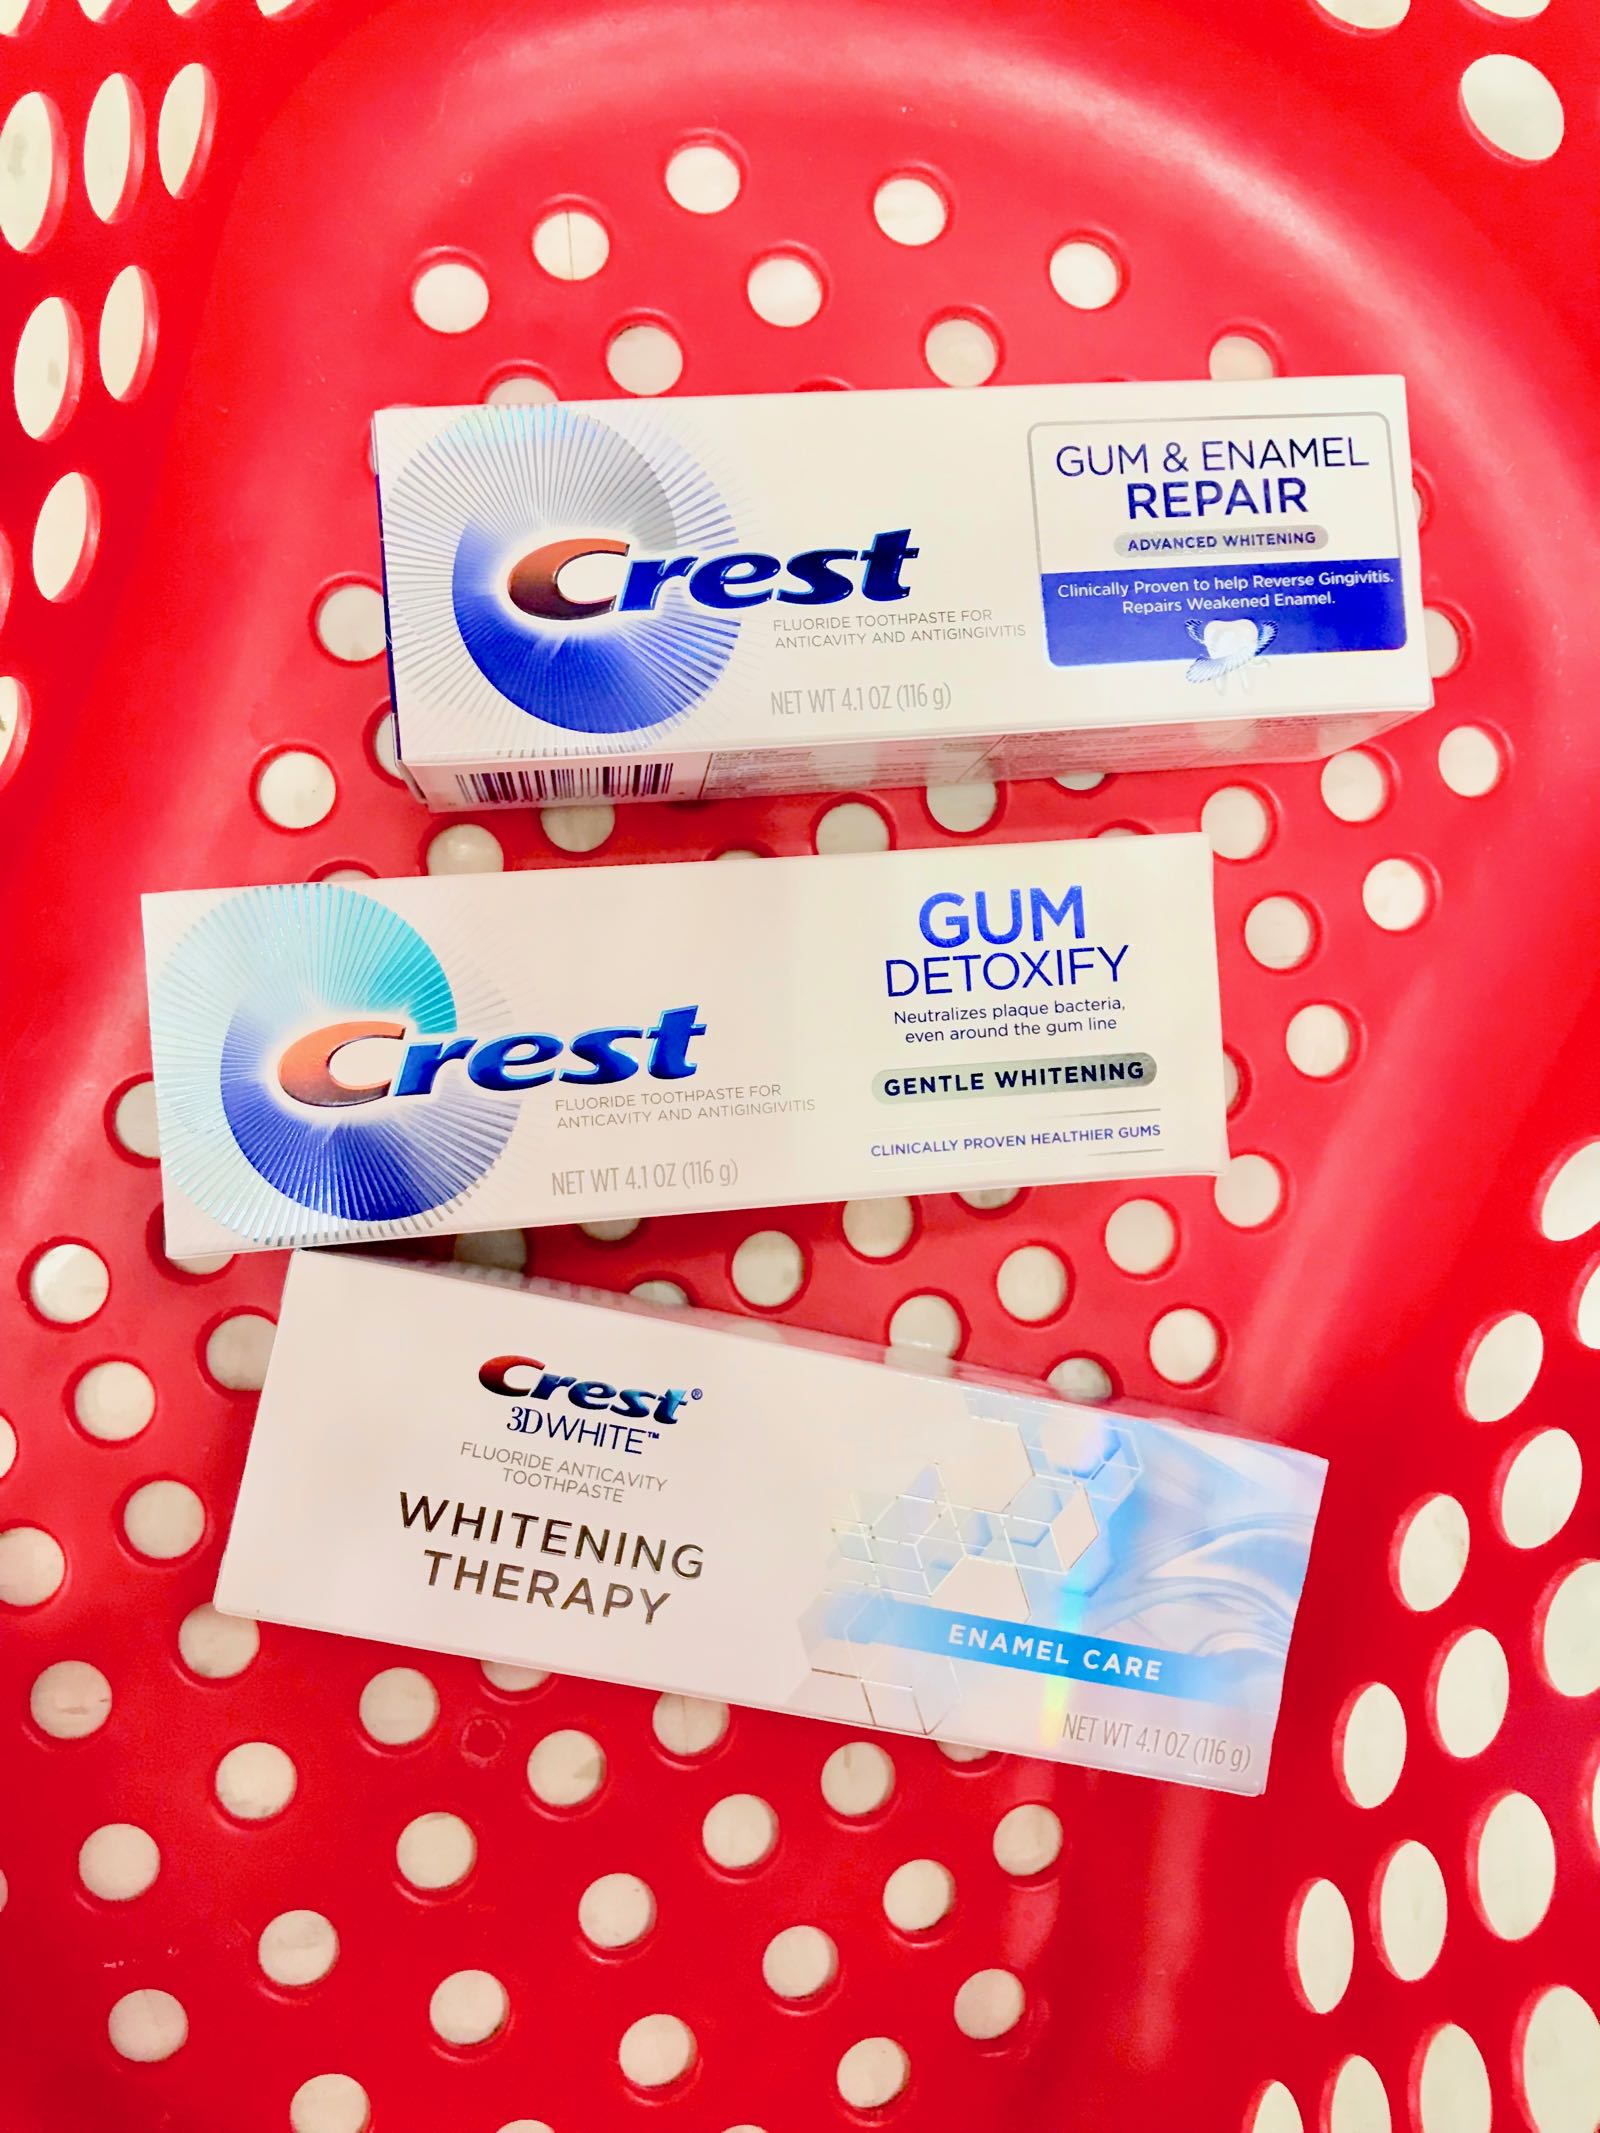 Save $2 on Crest Toothpaste at Target - click here to get the deal!